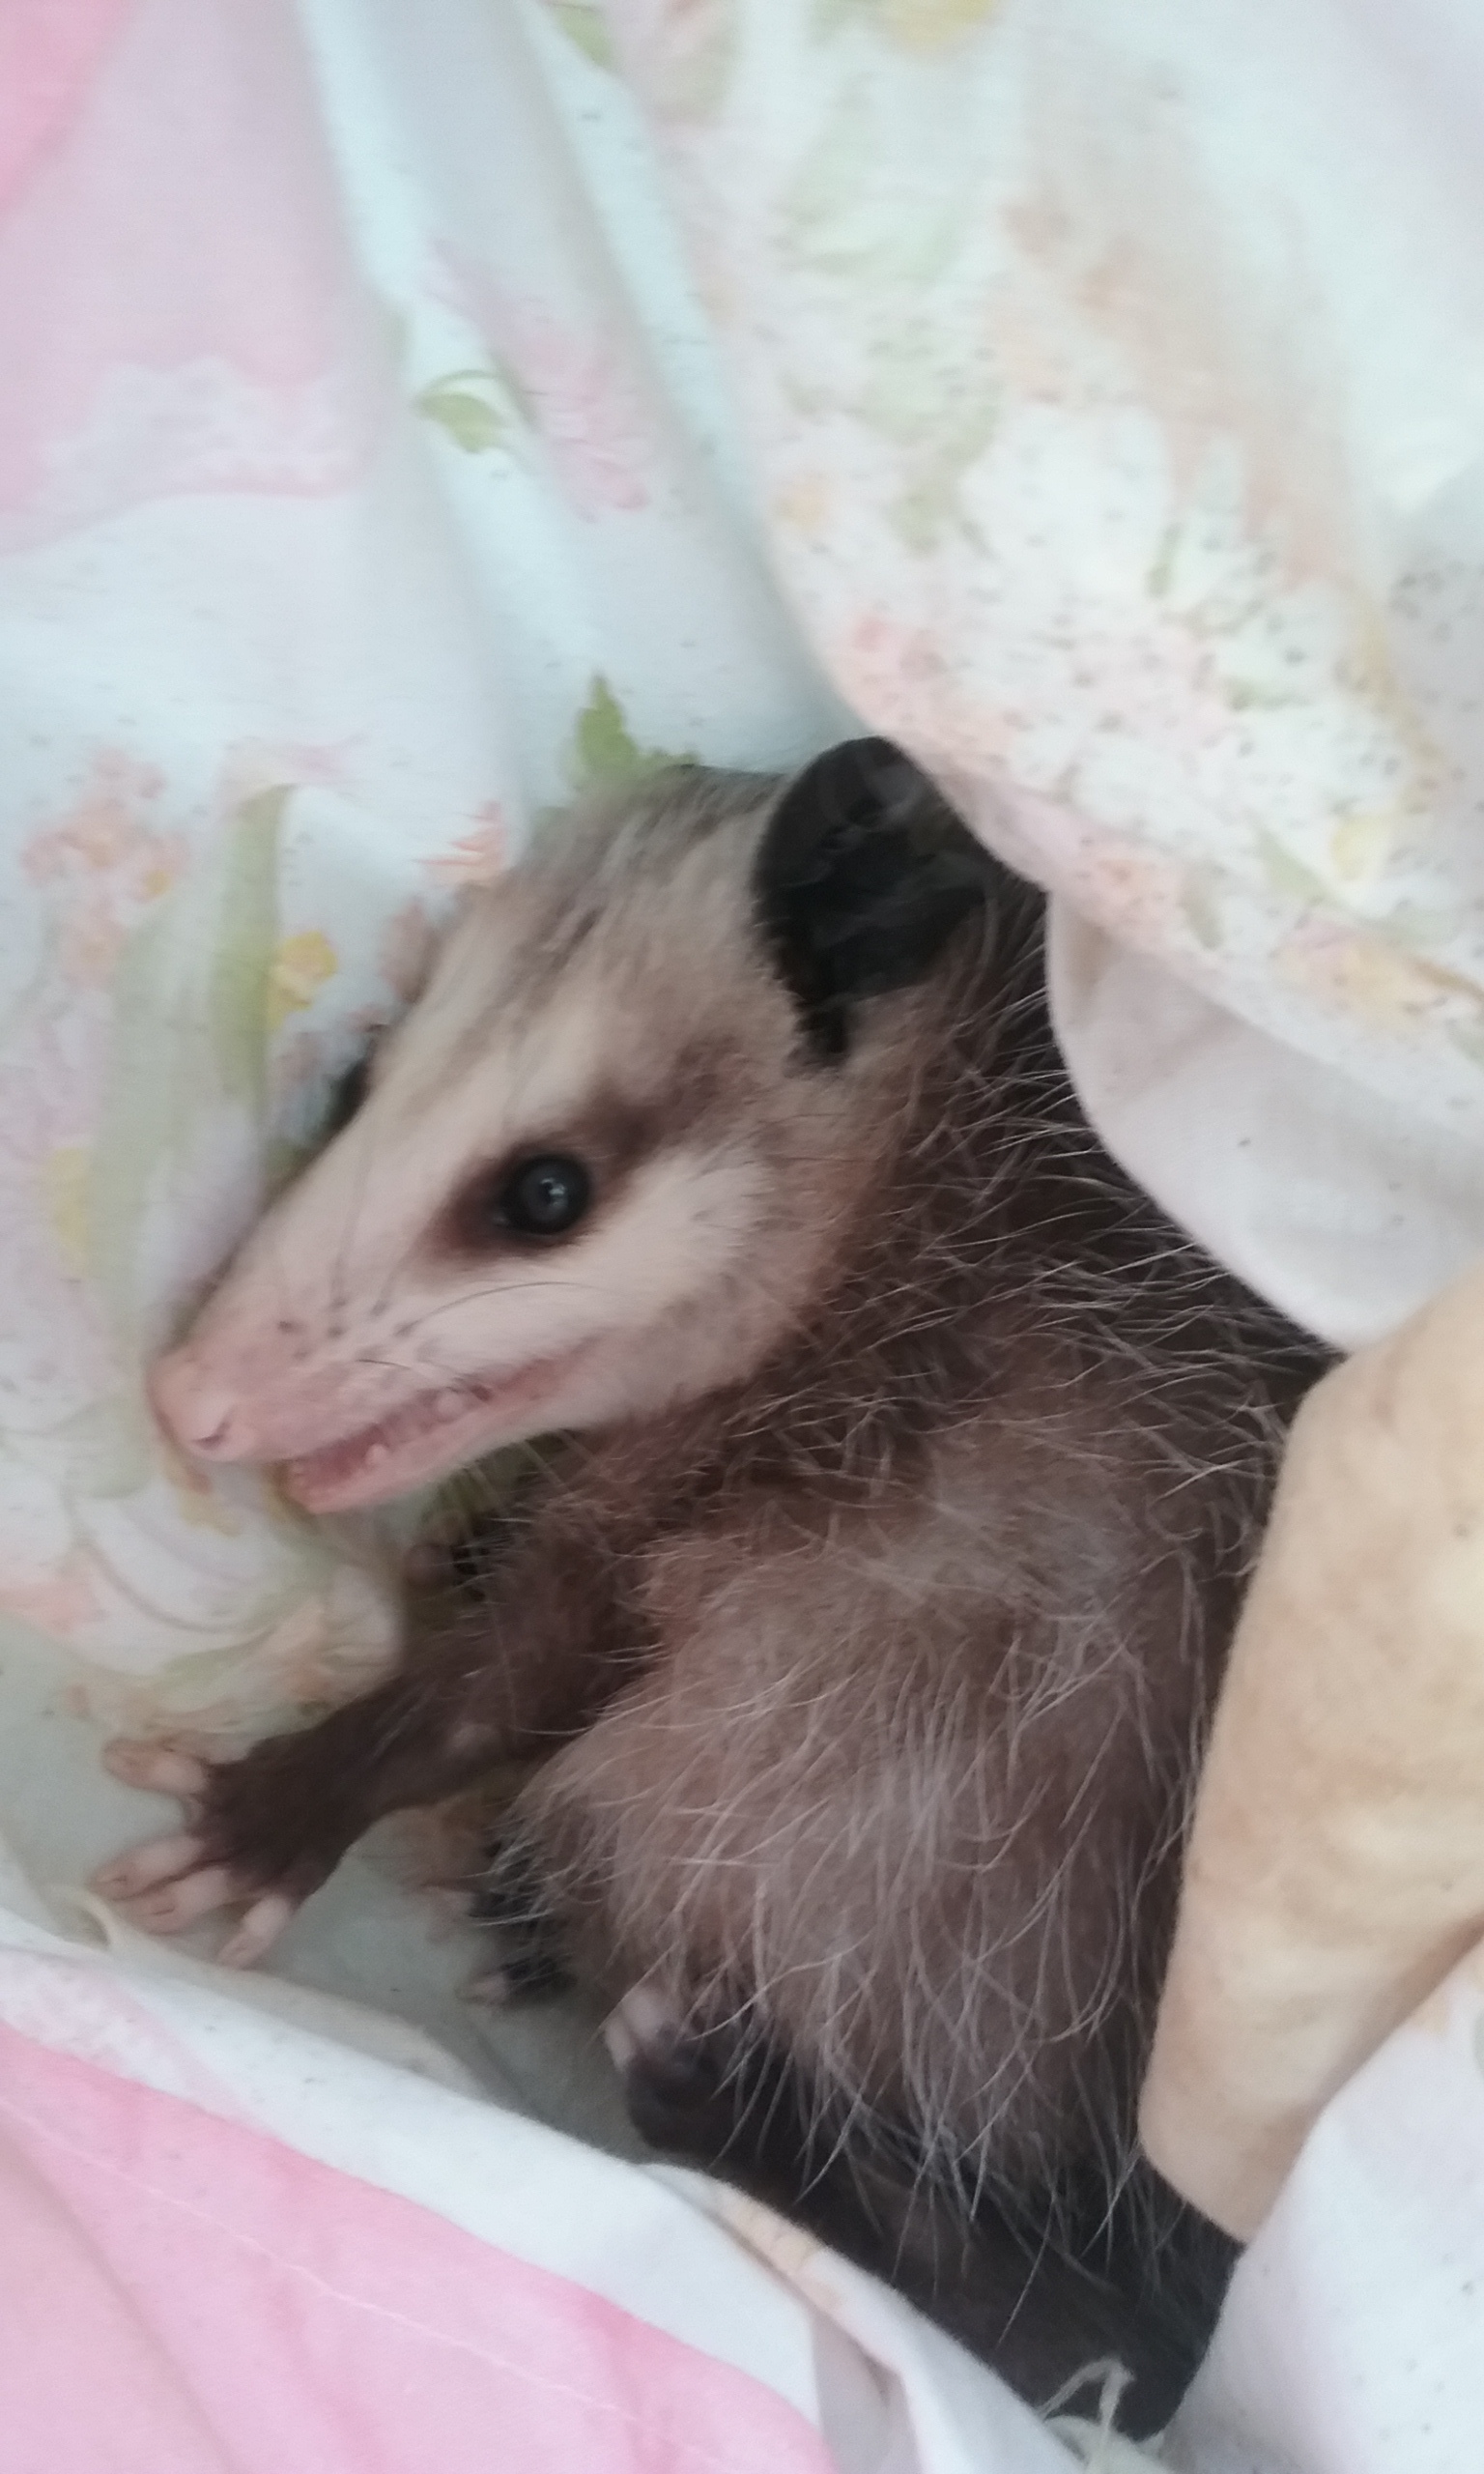 Baby opossums in our rehab program enjoy hammocks. We make them out of pillow cases and hang in their enclosures.